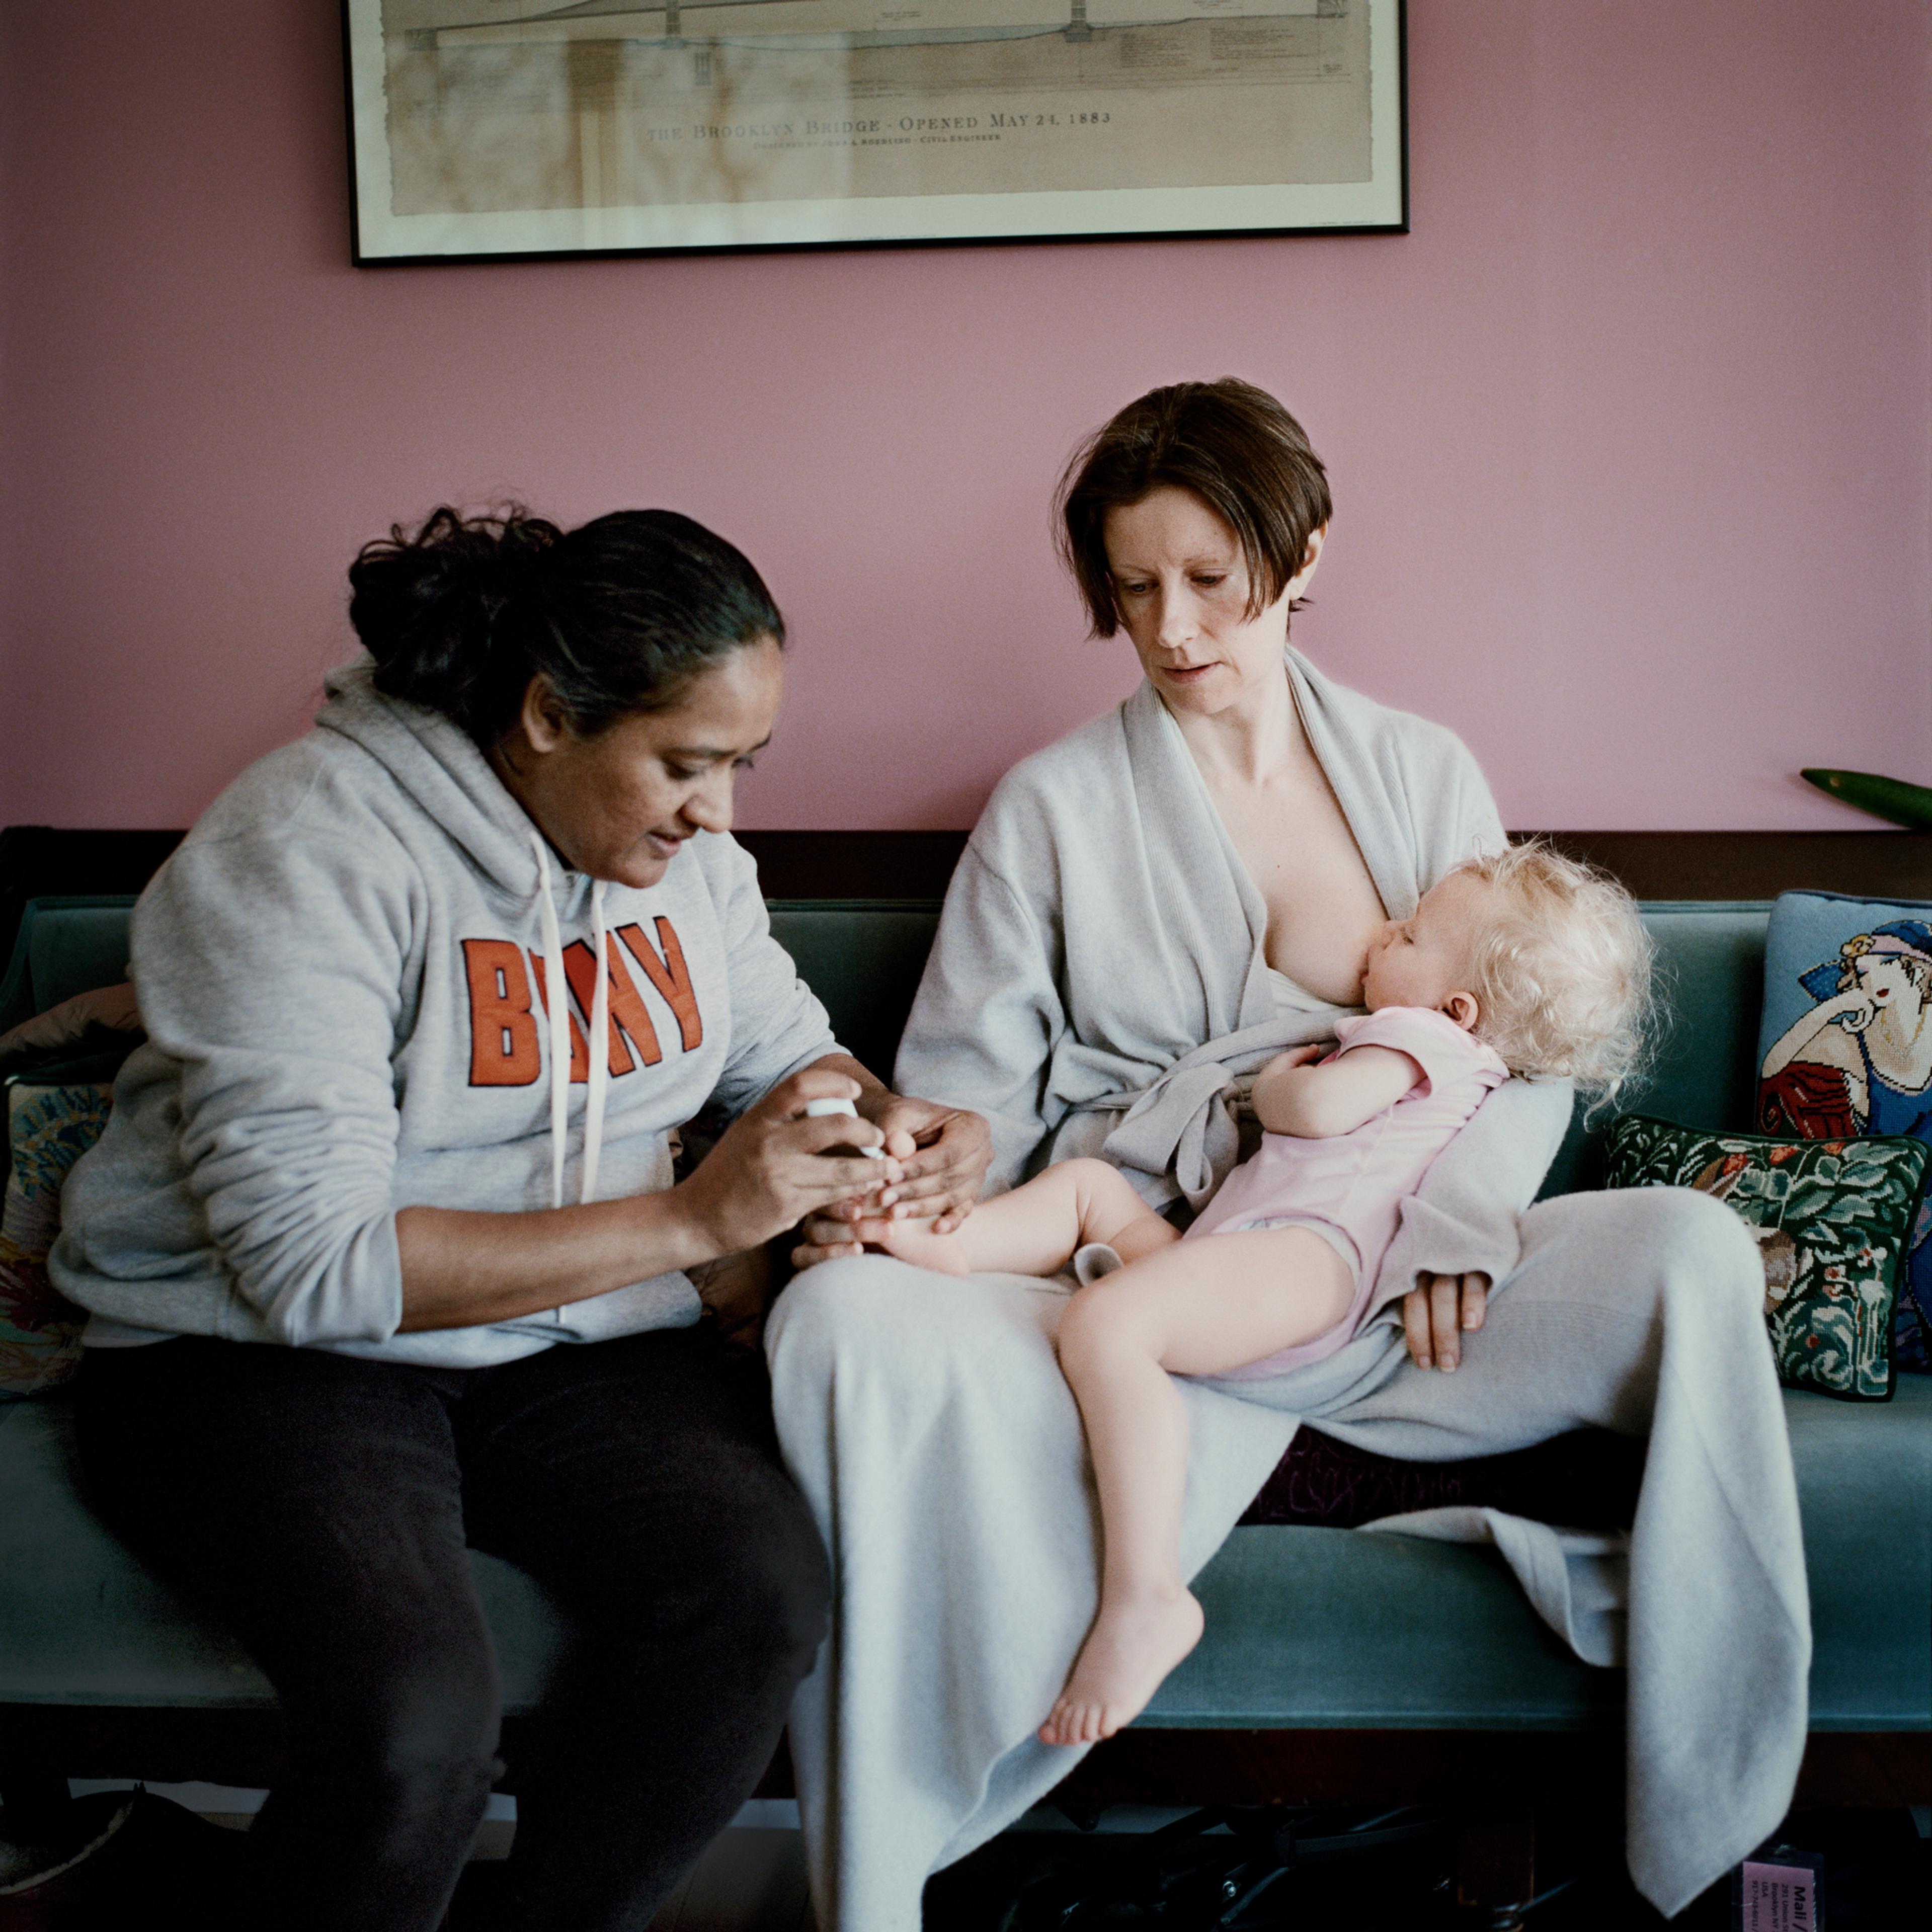 A photograph of a mother and child being groomed by a woman in their apartment